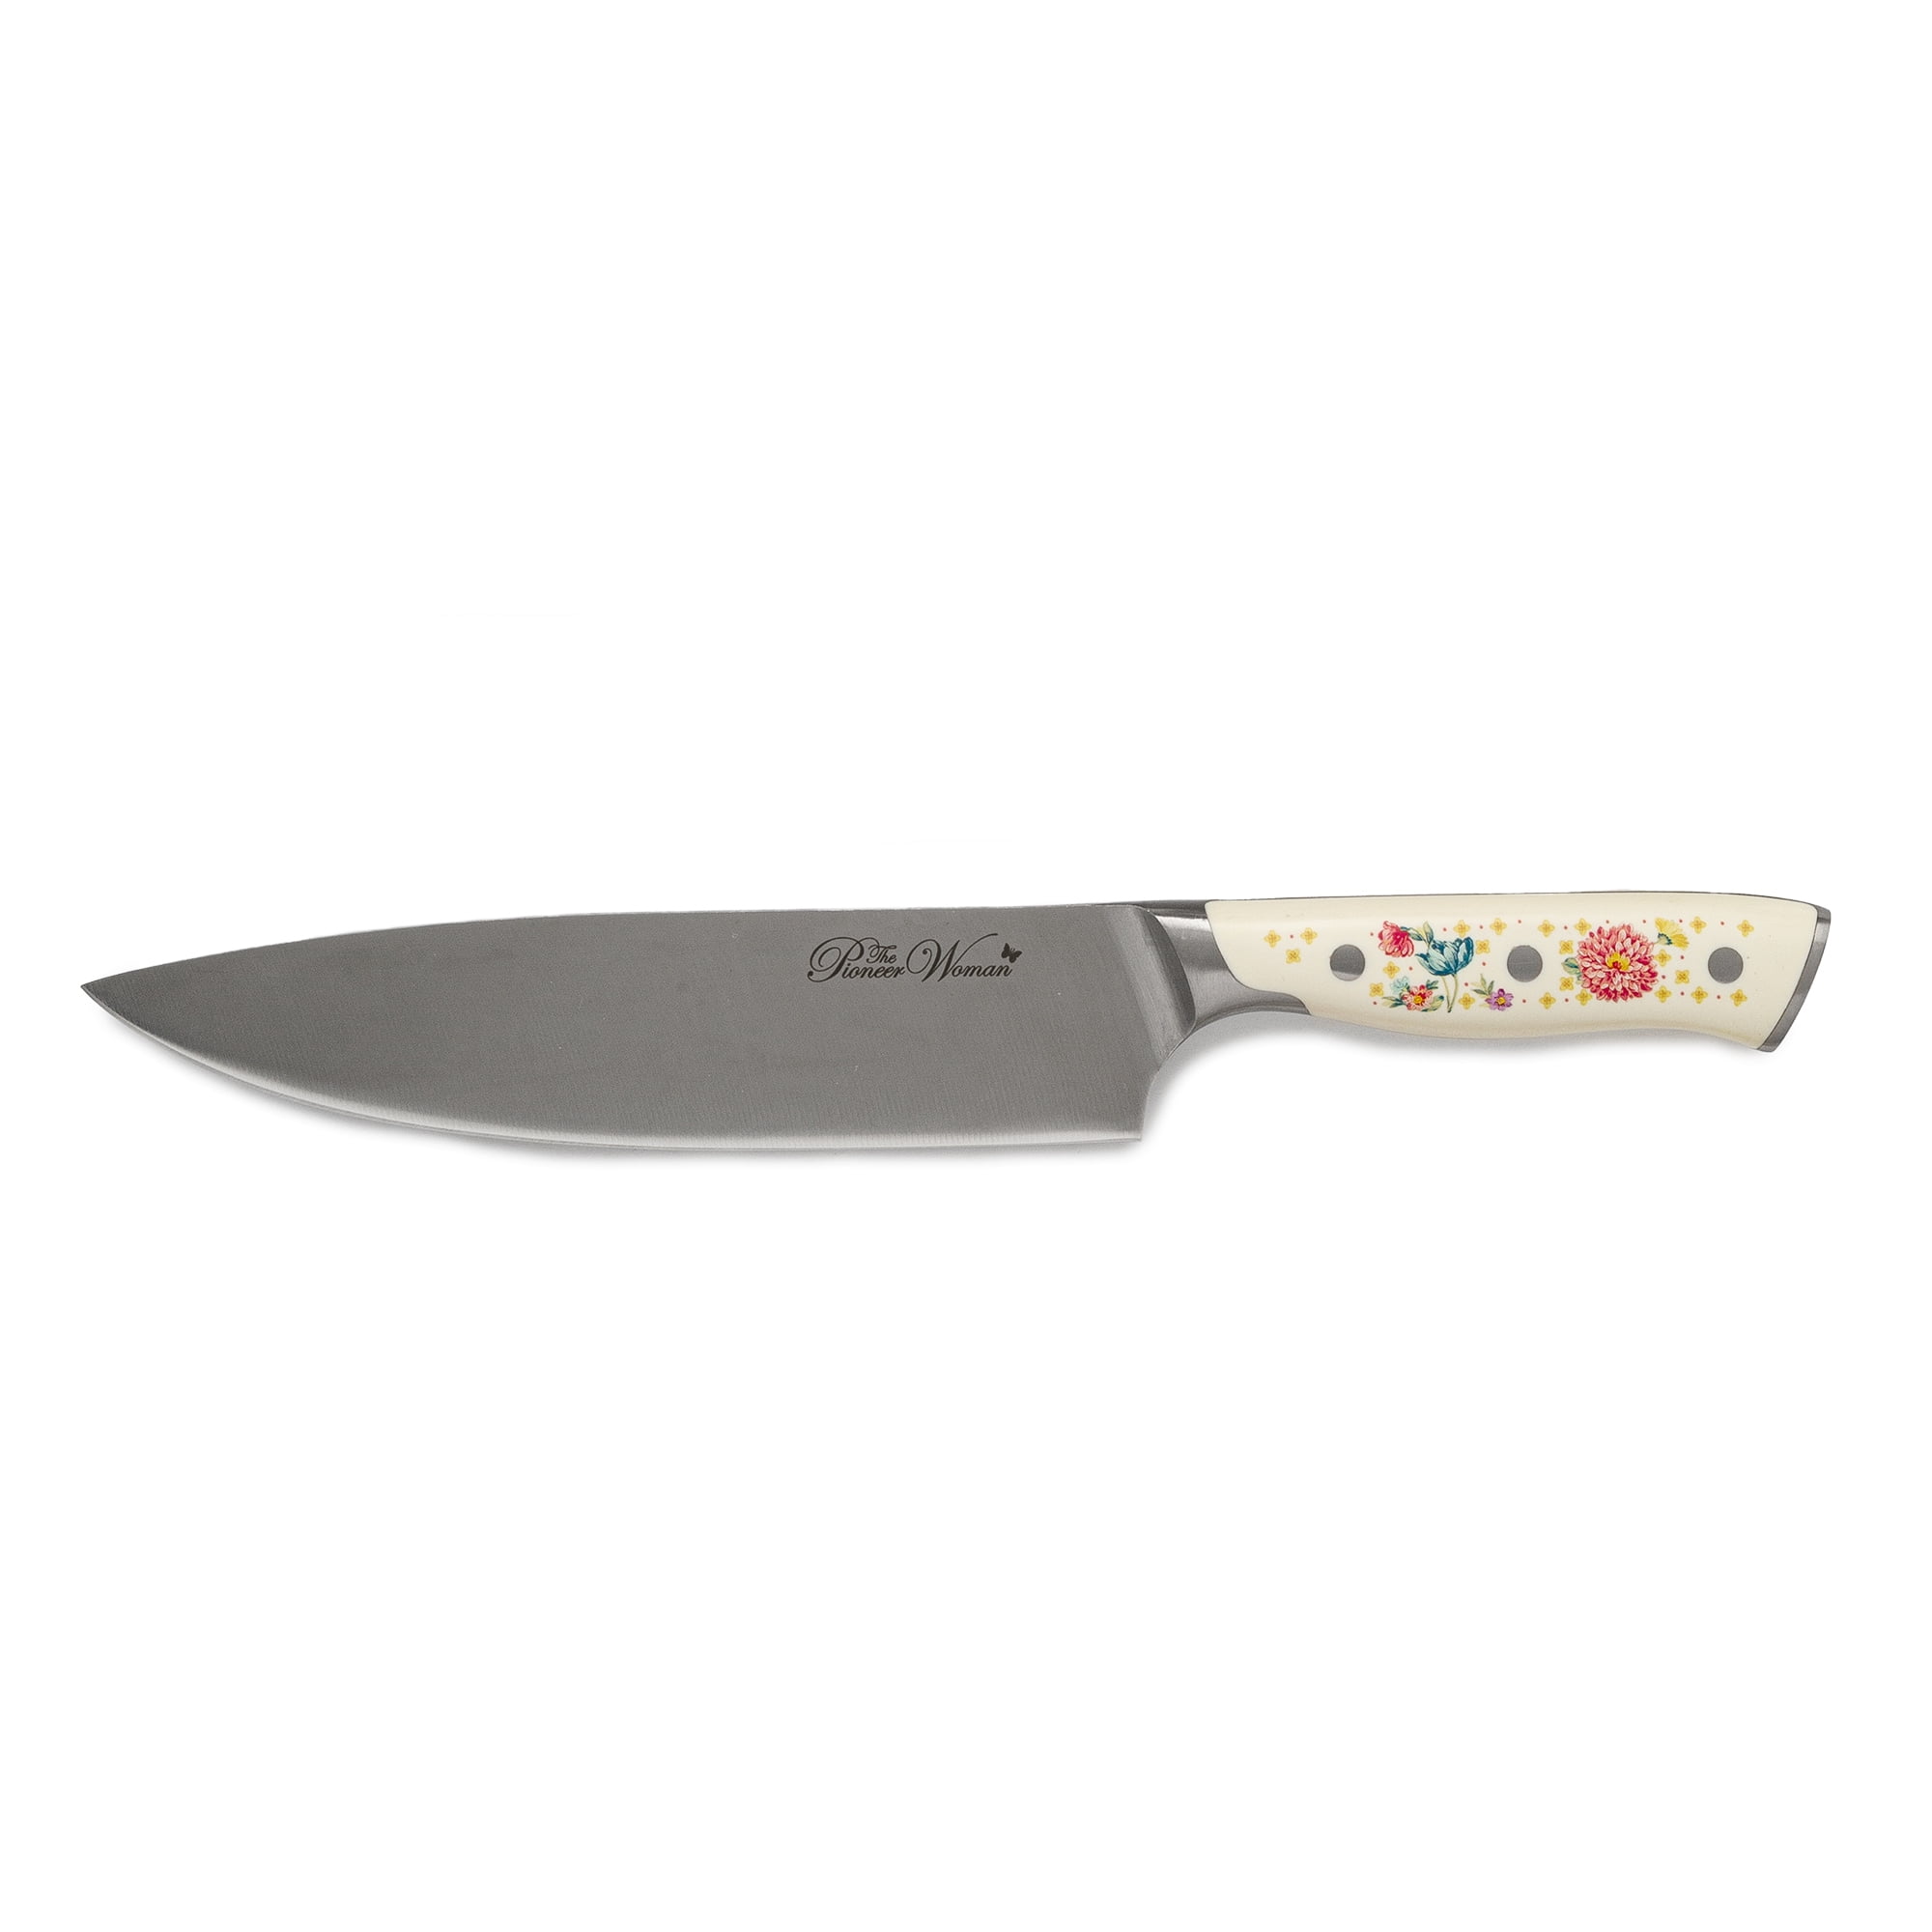 The Pioneer Woman Pioneer Signature 8 inch Stainless Steel Chef Knife,  Floral